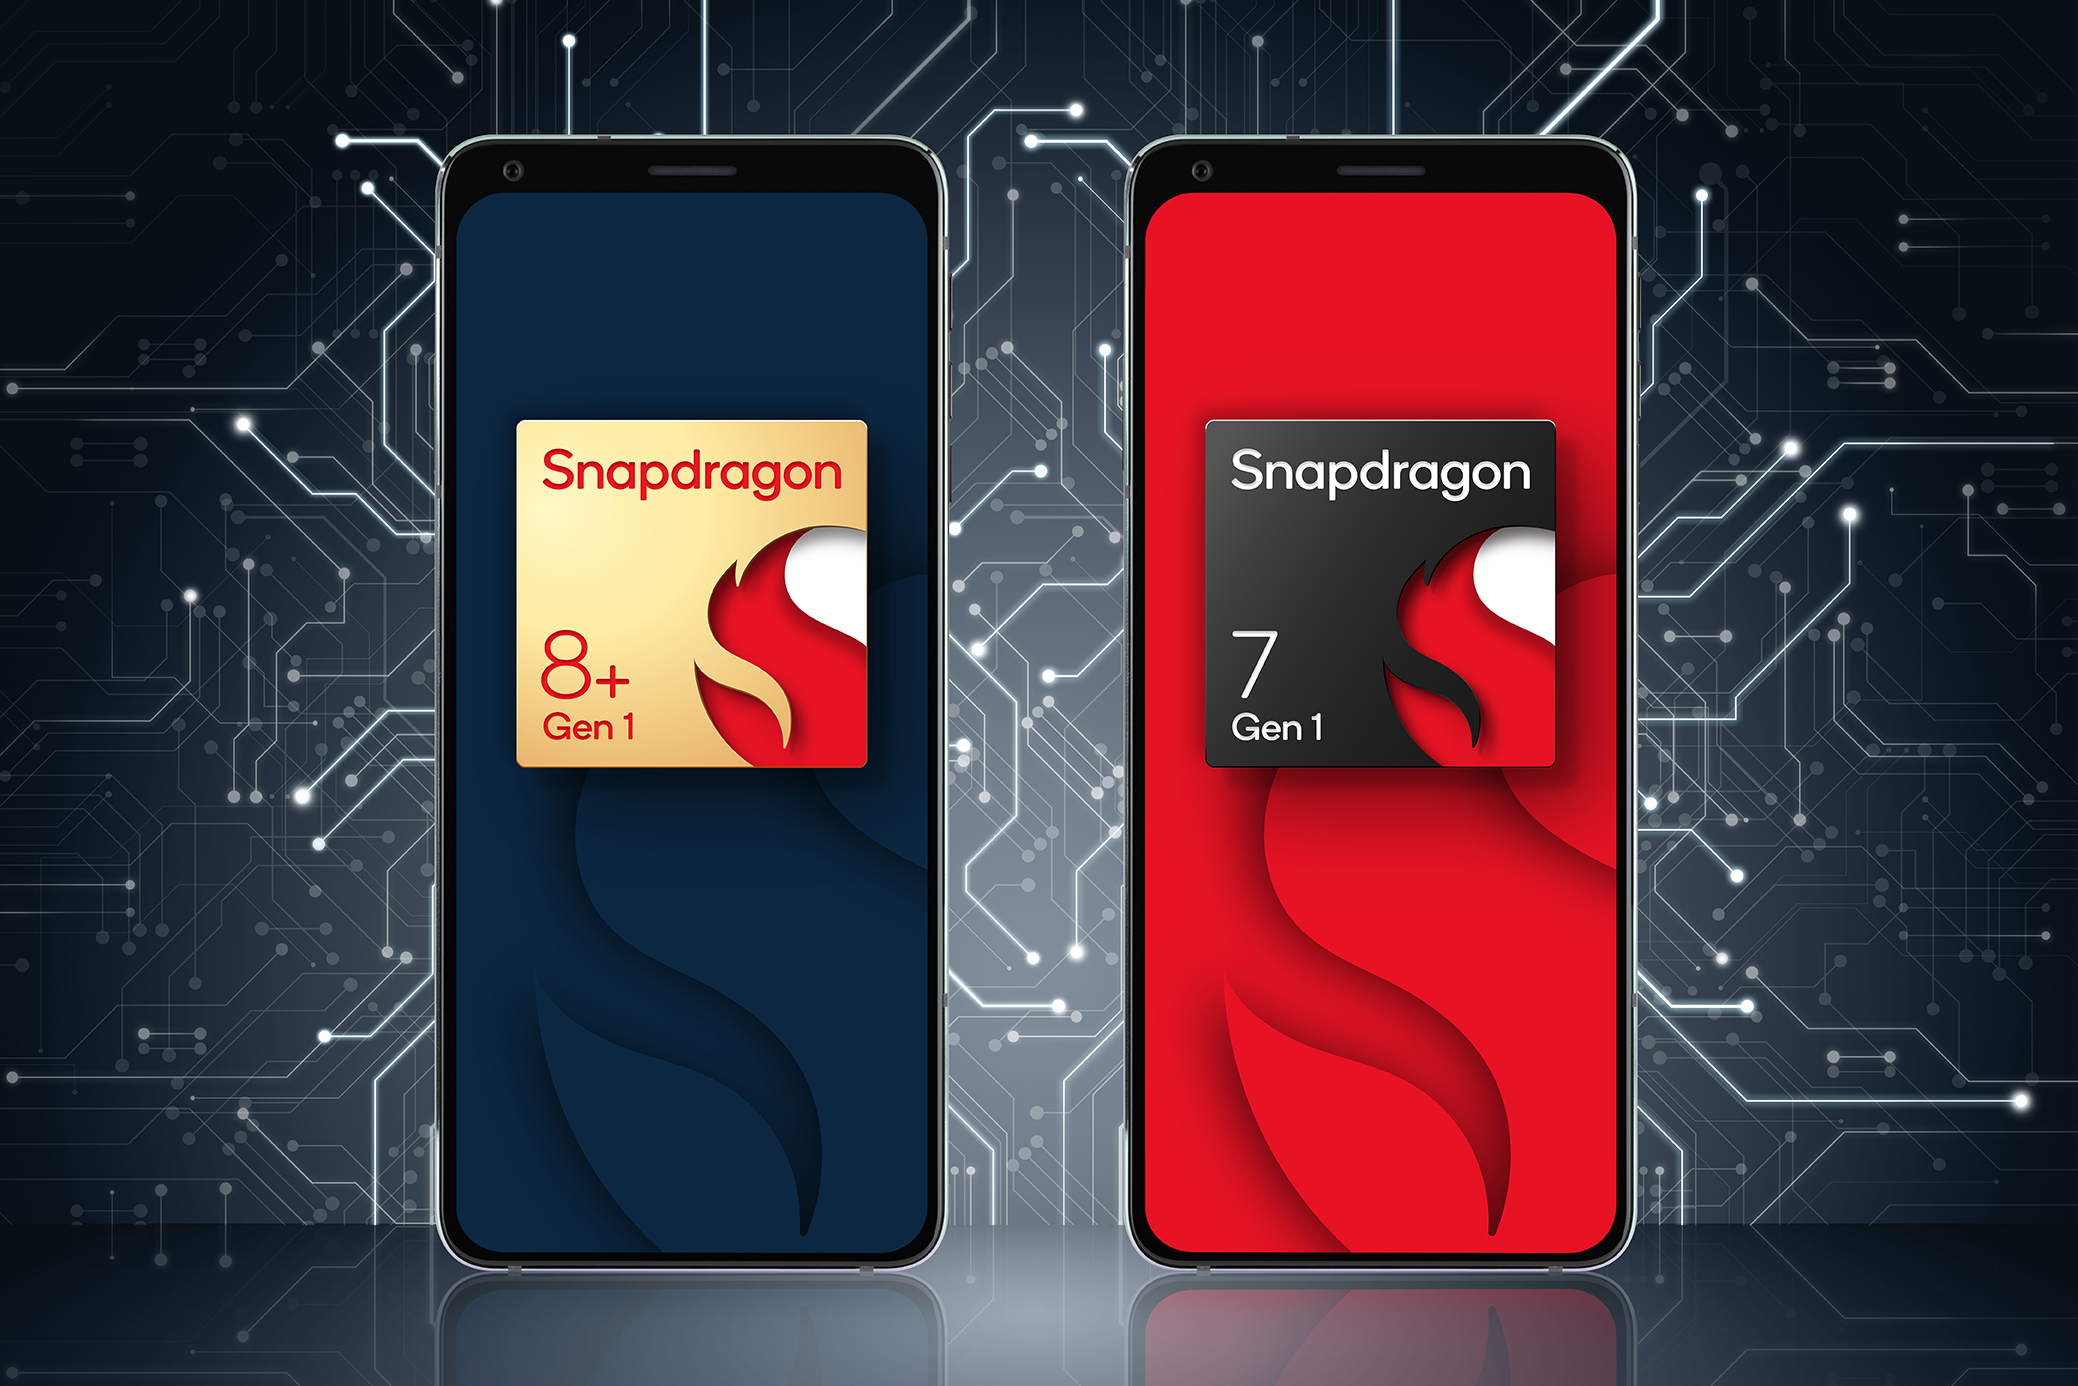 The overclocked Snapdragon 8 Gen 2 is coming to more phones